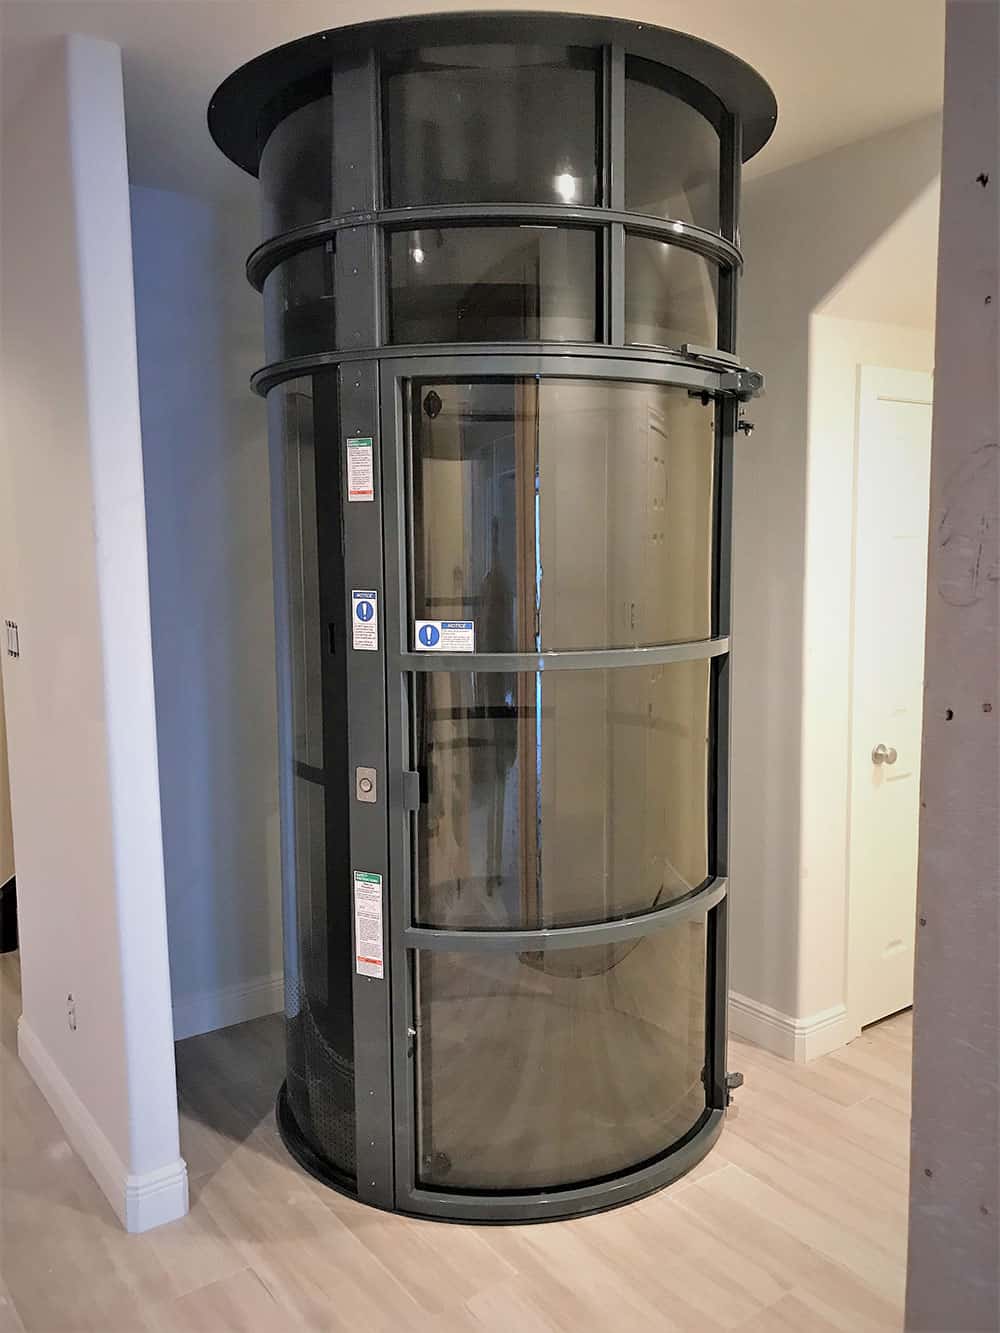 Bottom level of a pve52 wheelchair elevator installed in a houston area home